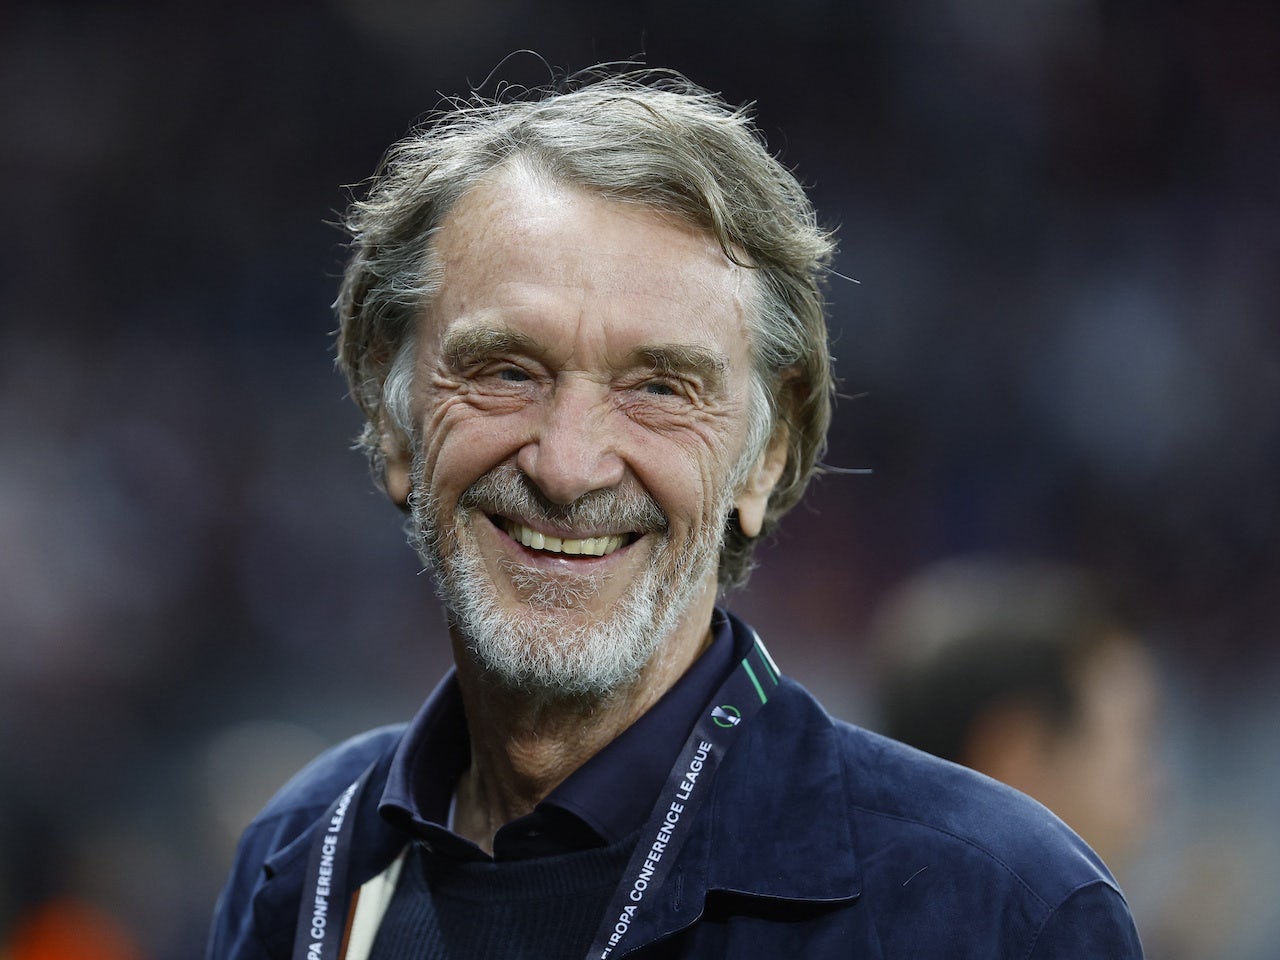 Man United co-owner Sir Jim Ratcliffe 'in talks' to appoint former Chelsea director